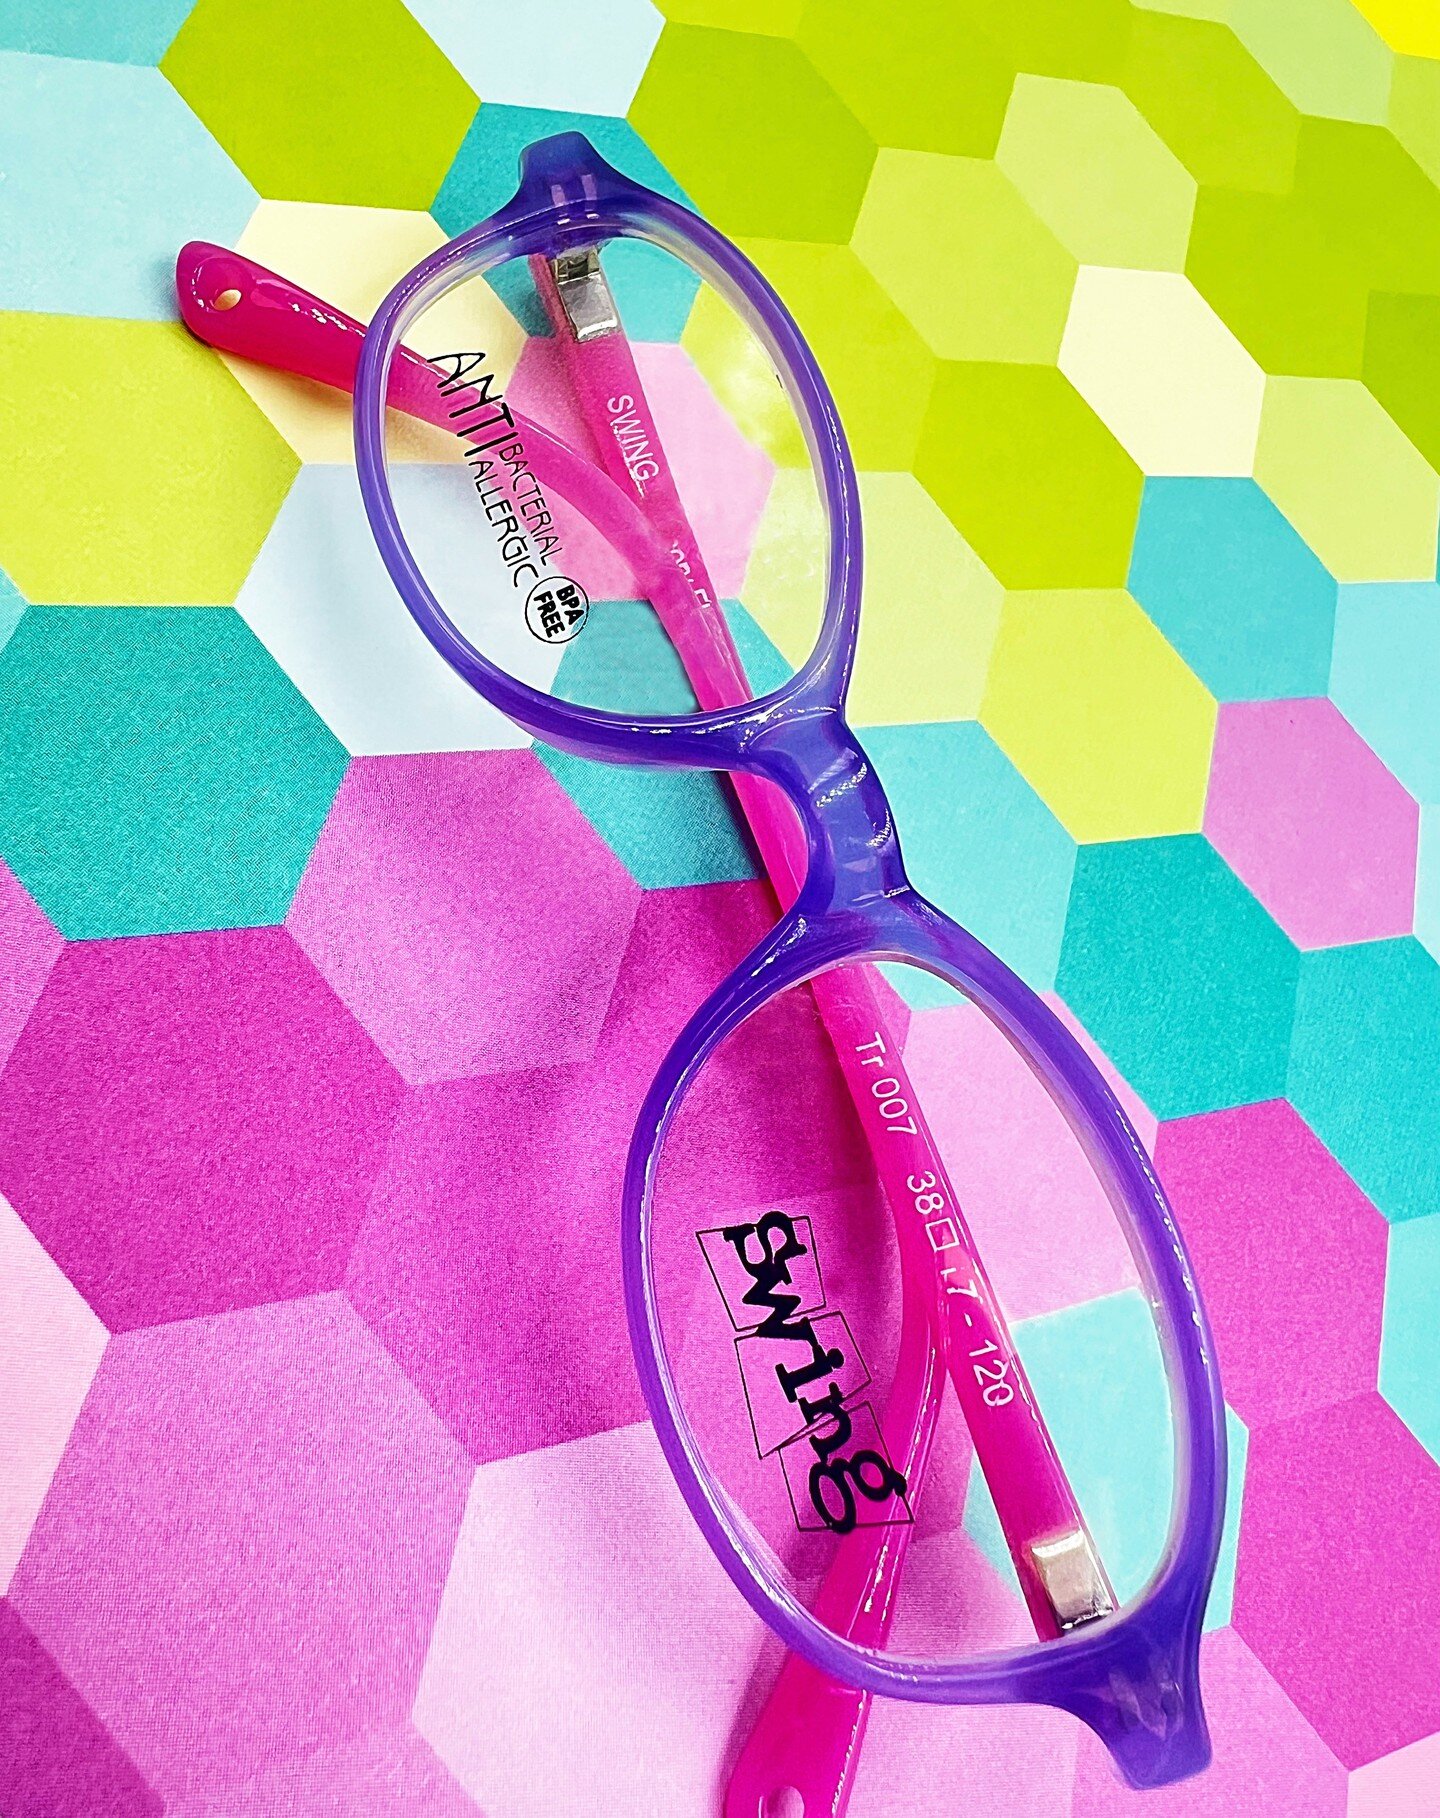 Our colorful two-toned frames are a perfect way for your child to express their personality, while also protecting their eyes!
📷 TR: 007 Col. 35 
&bull;
&bull;
&bull;
&bull;

#tekaeyewear #glasses #eyefashion #eyewear #eyewearstyle #lovemyglasses #e